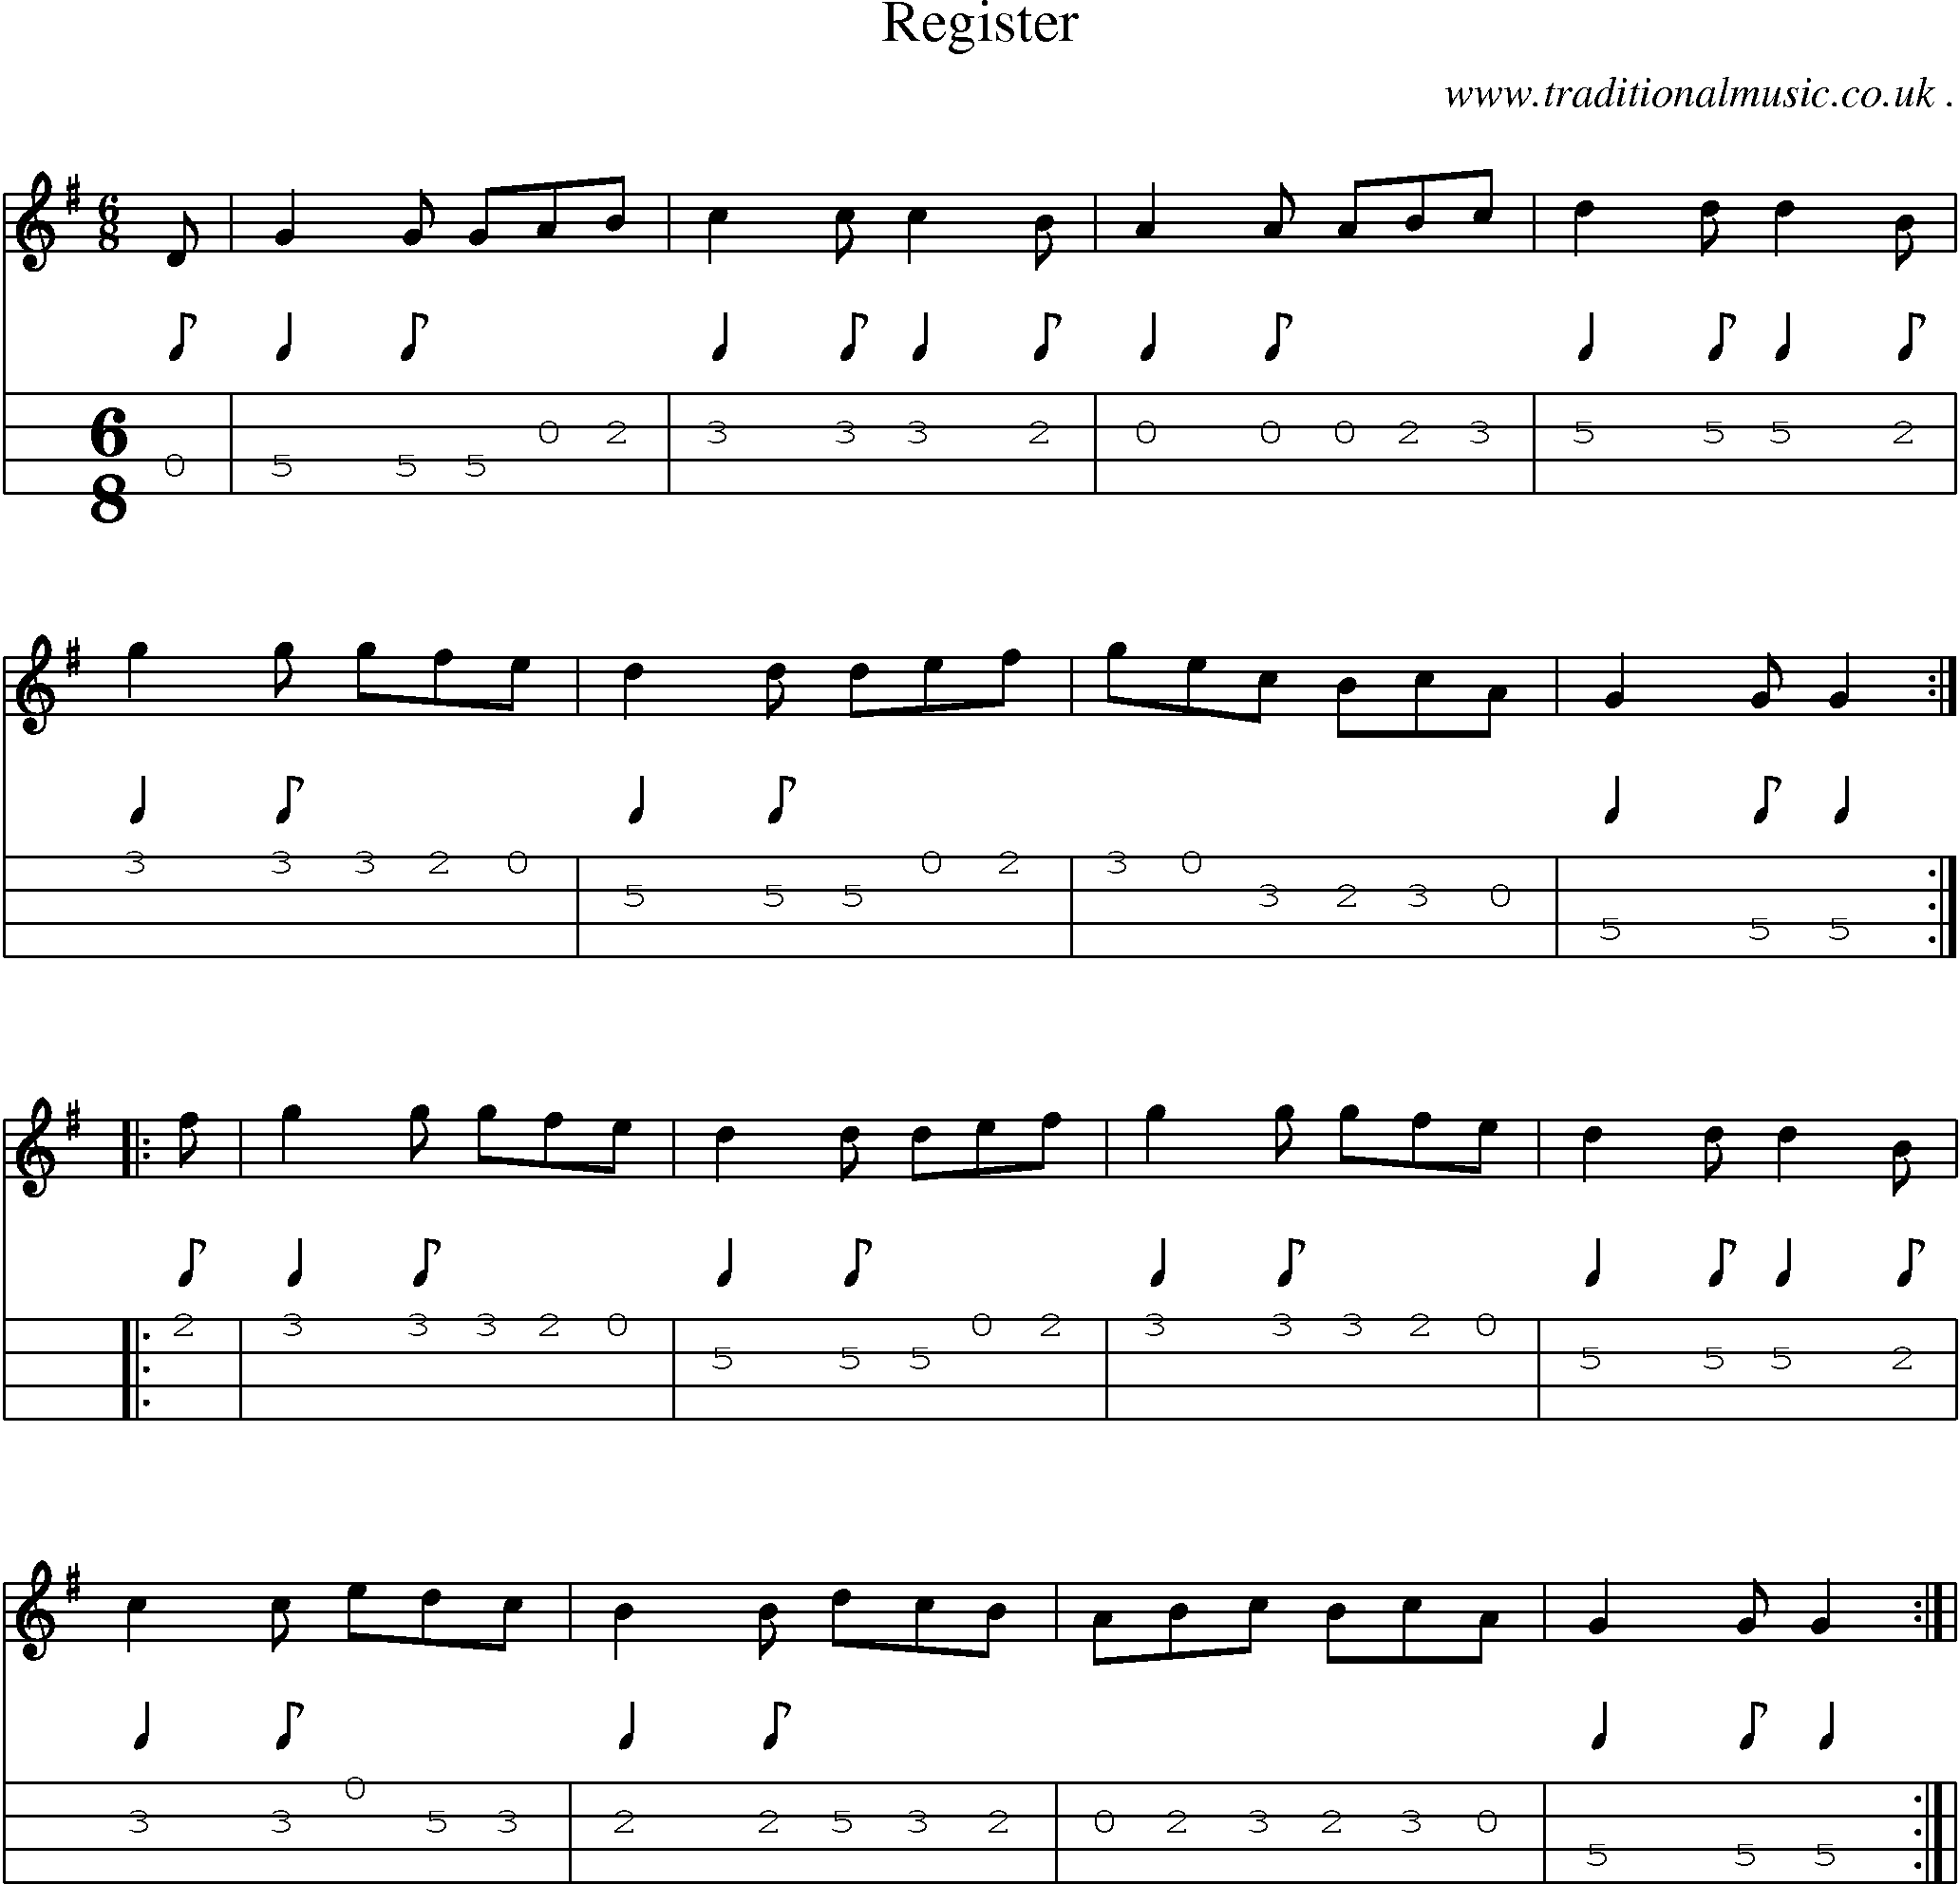 Sheet-Music and Mandolin Tabs for Register